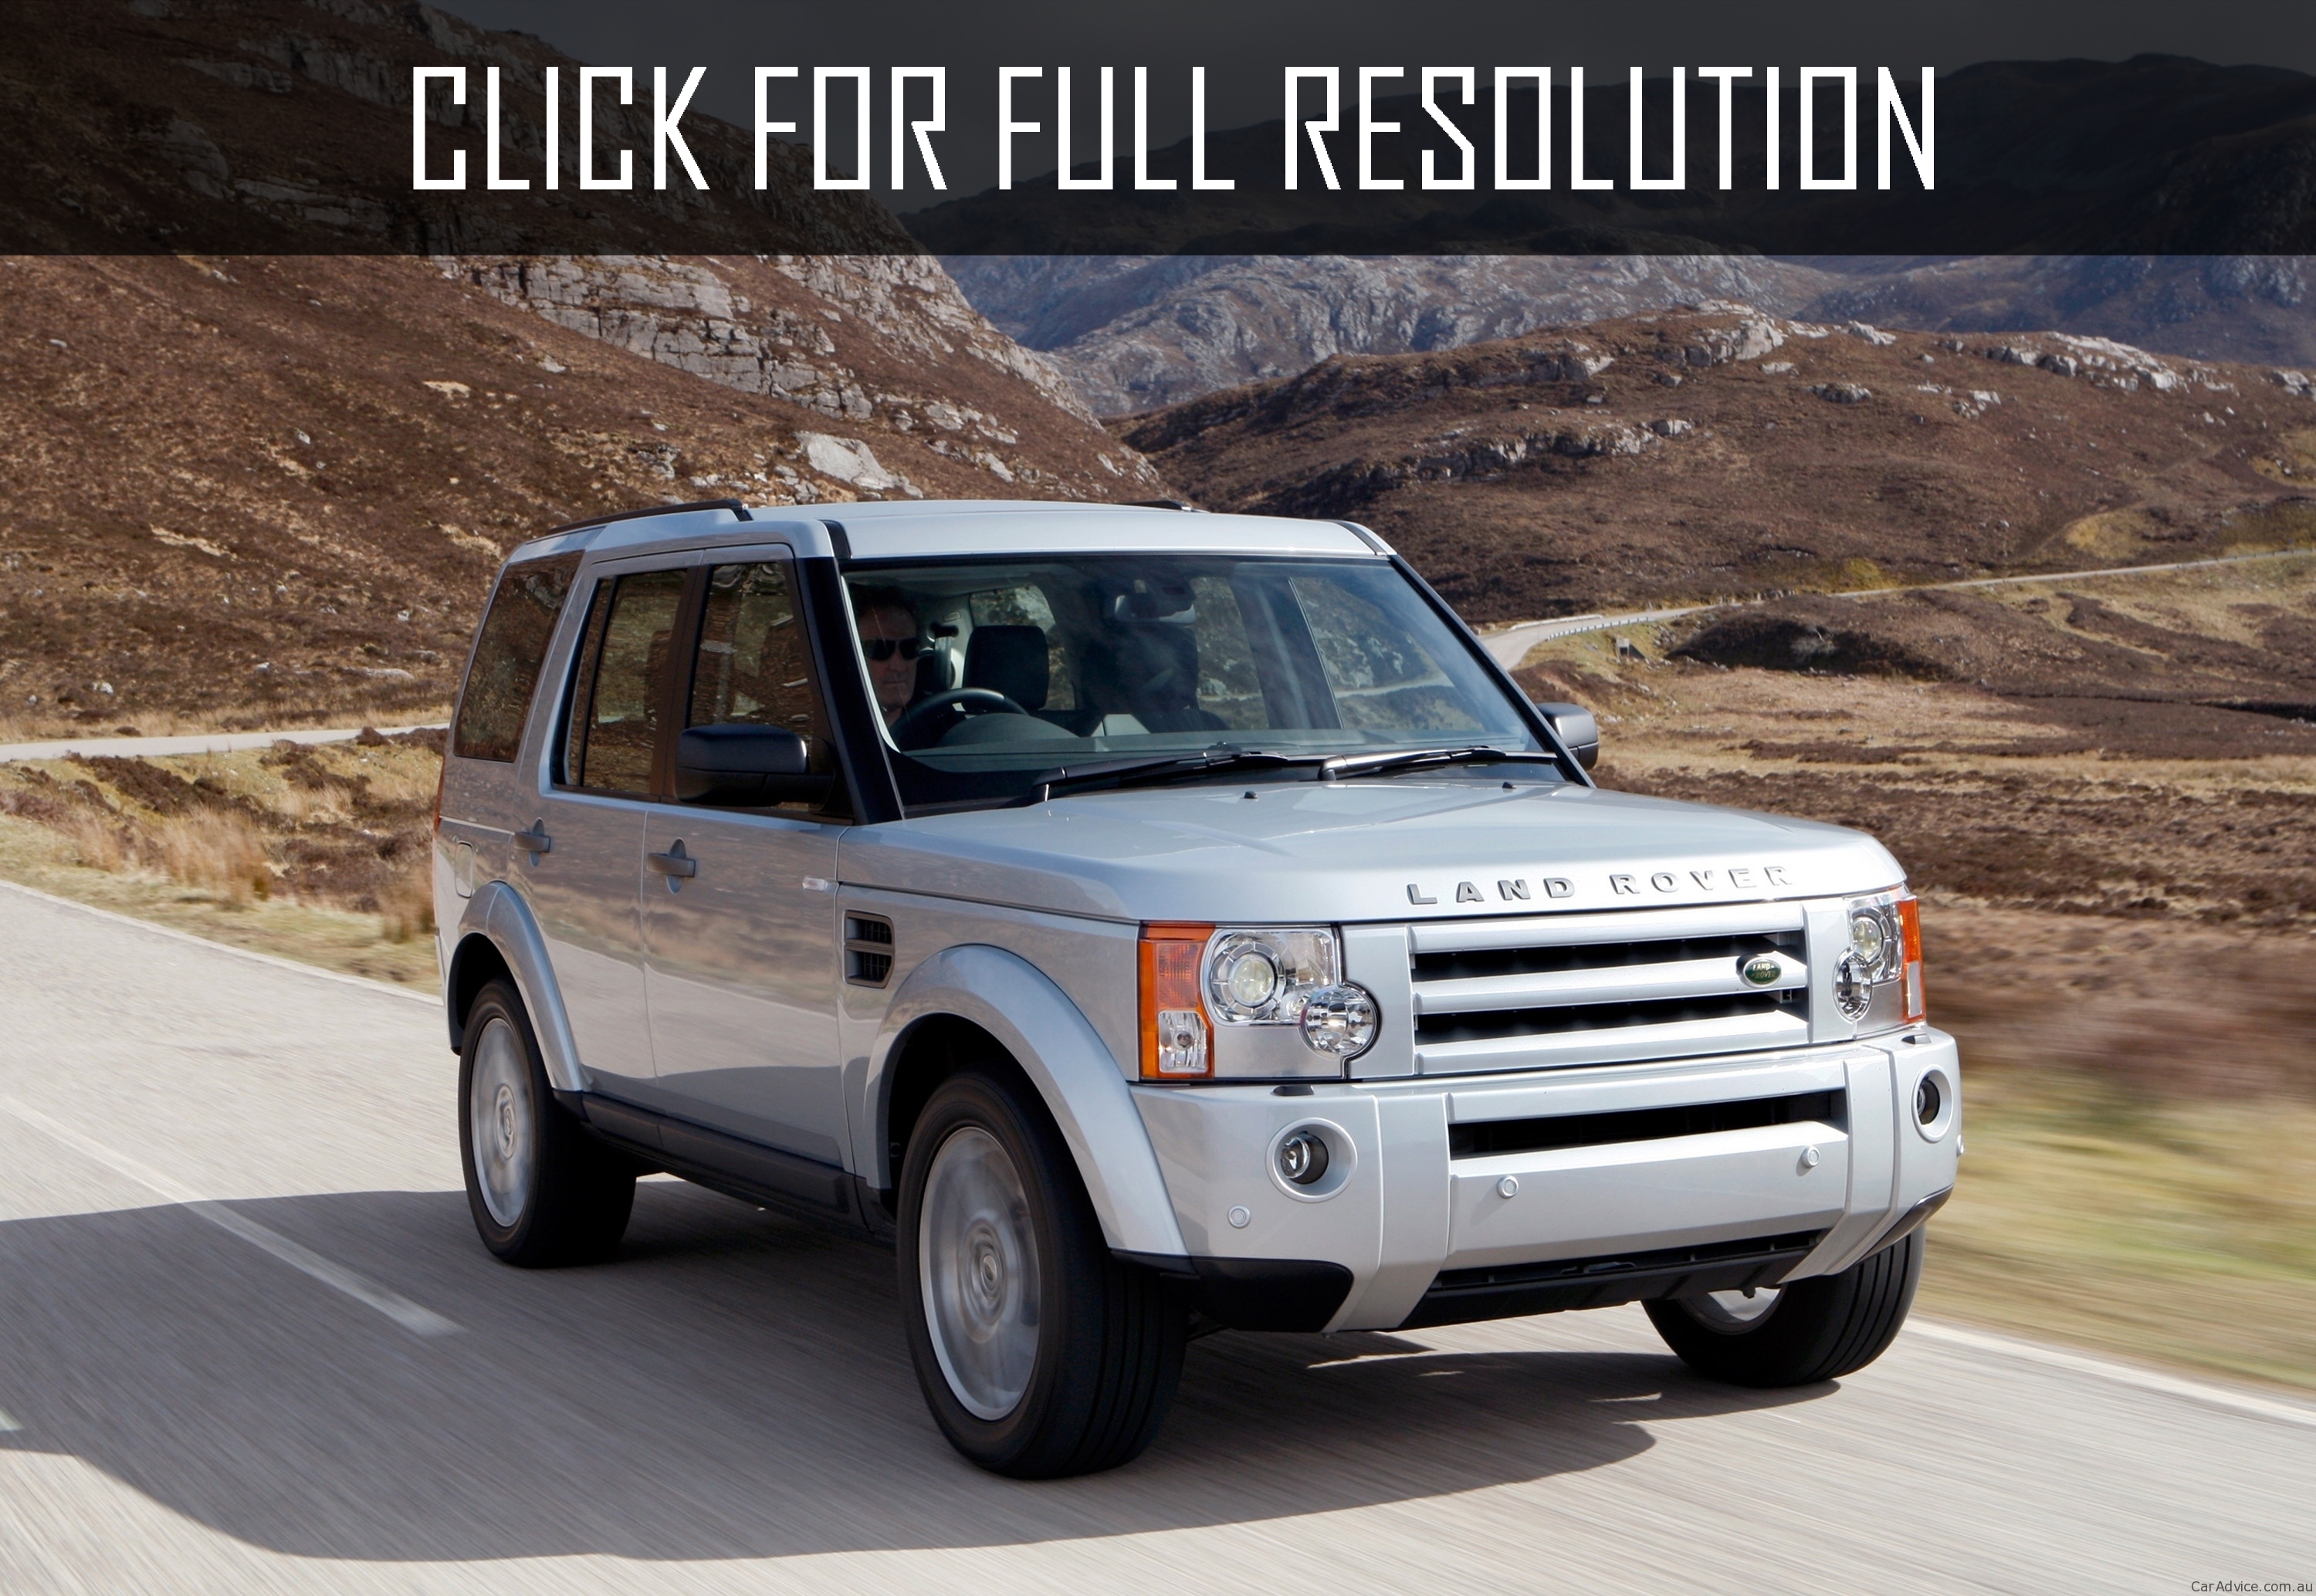 2010 Land Rover Discovery 3 news, reviews, msrp, ratings